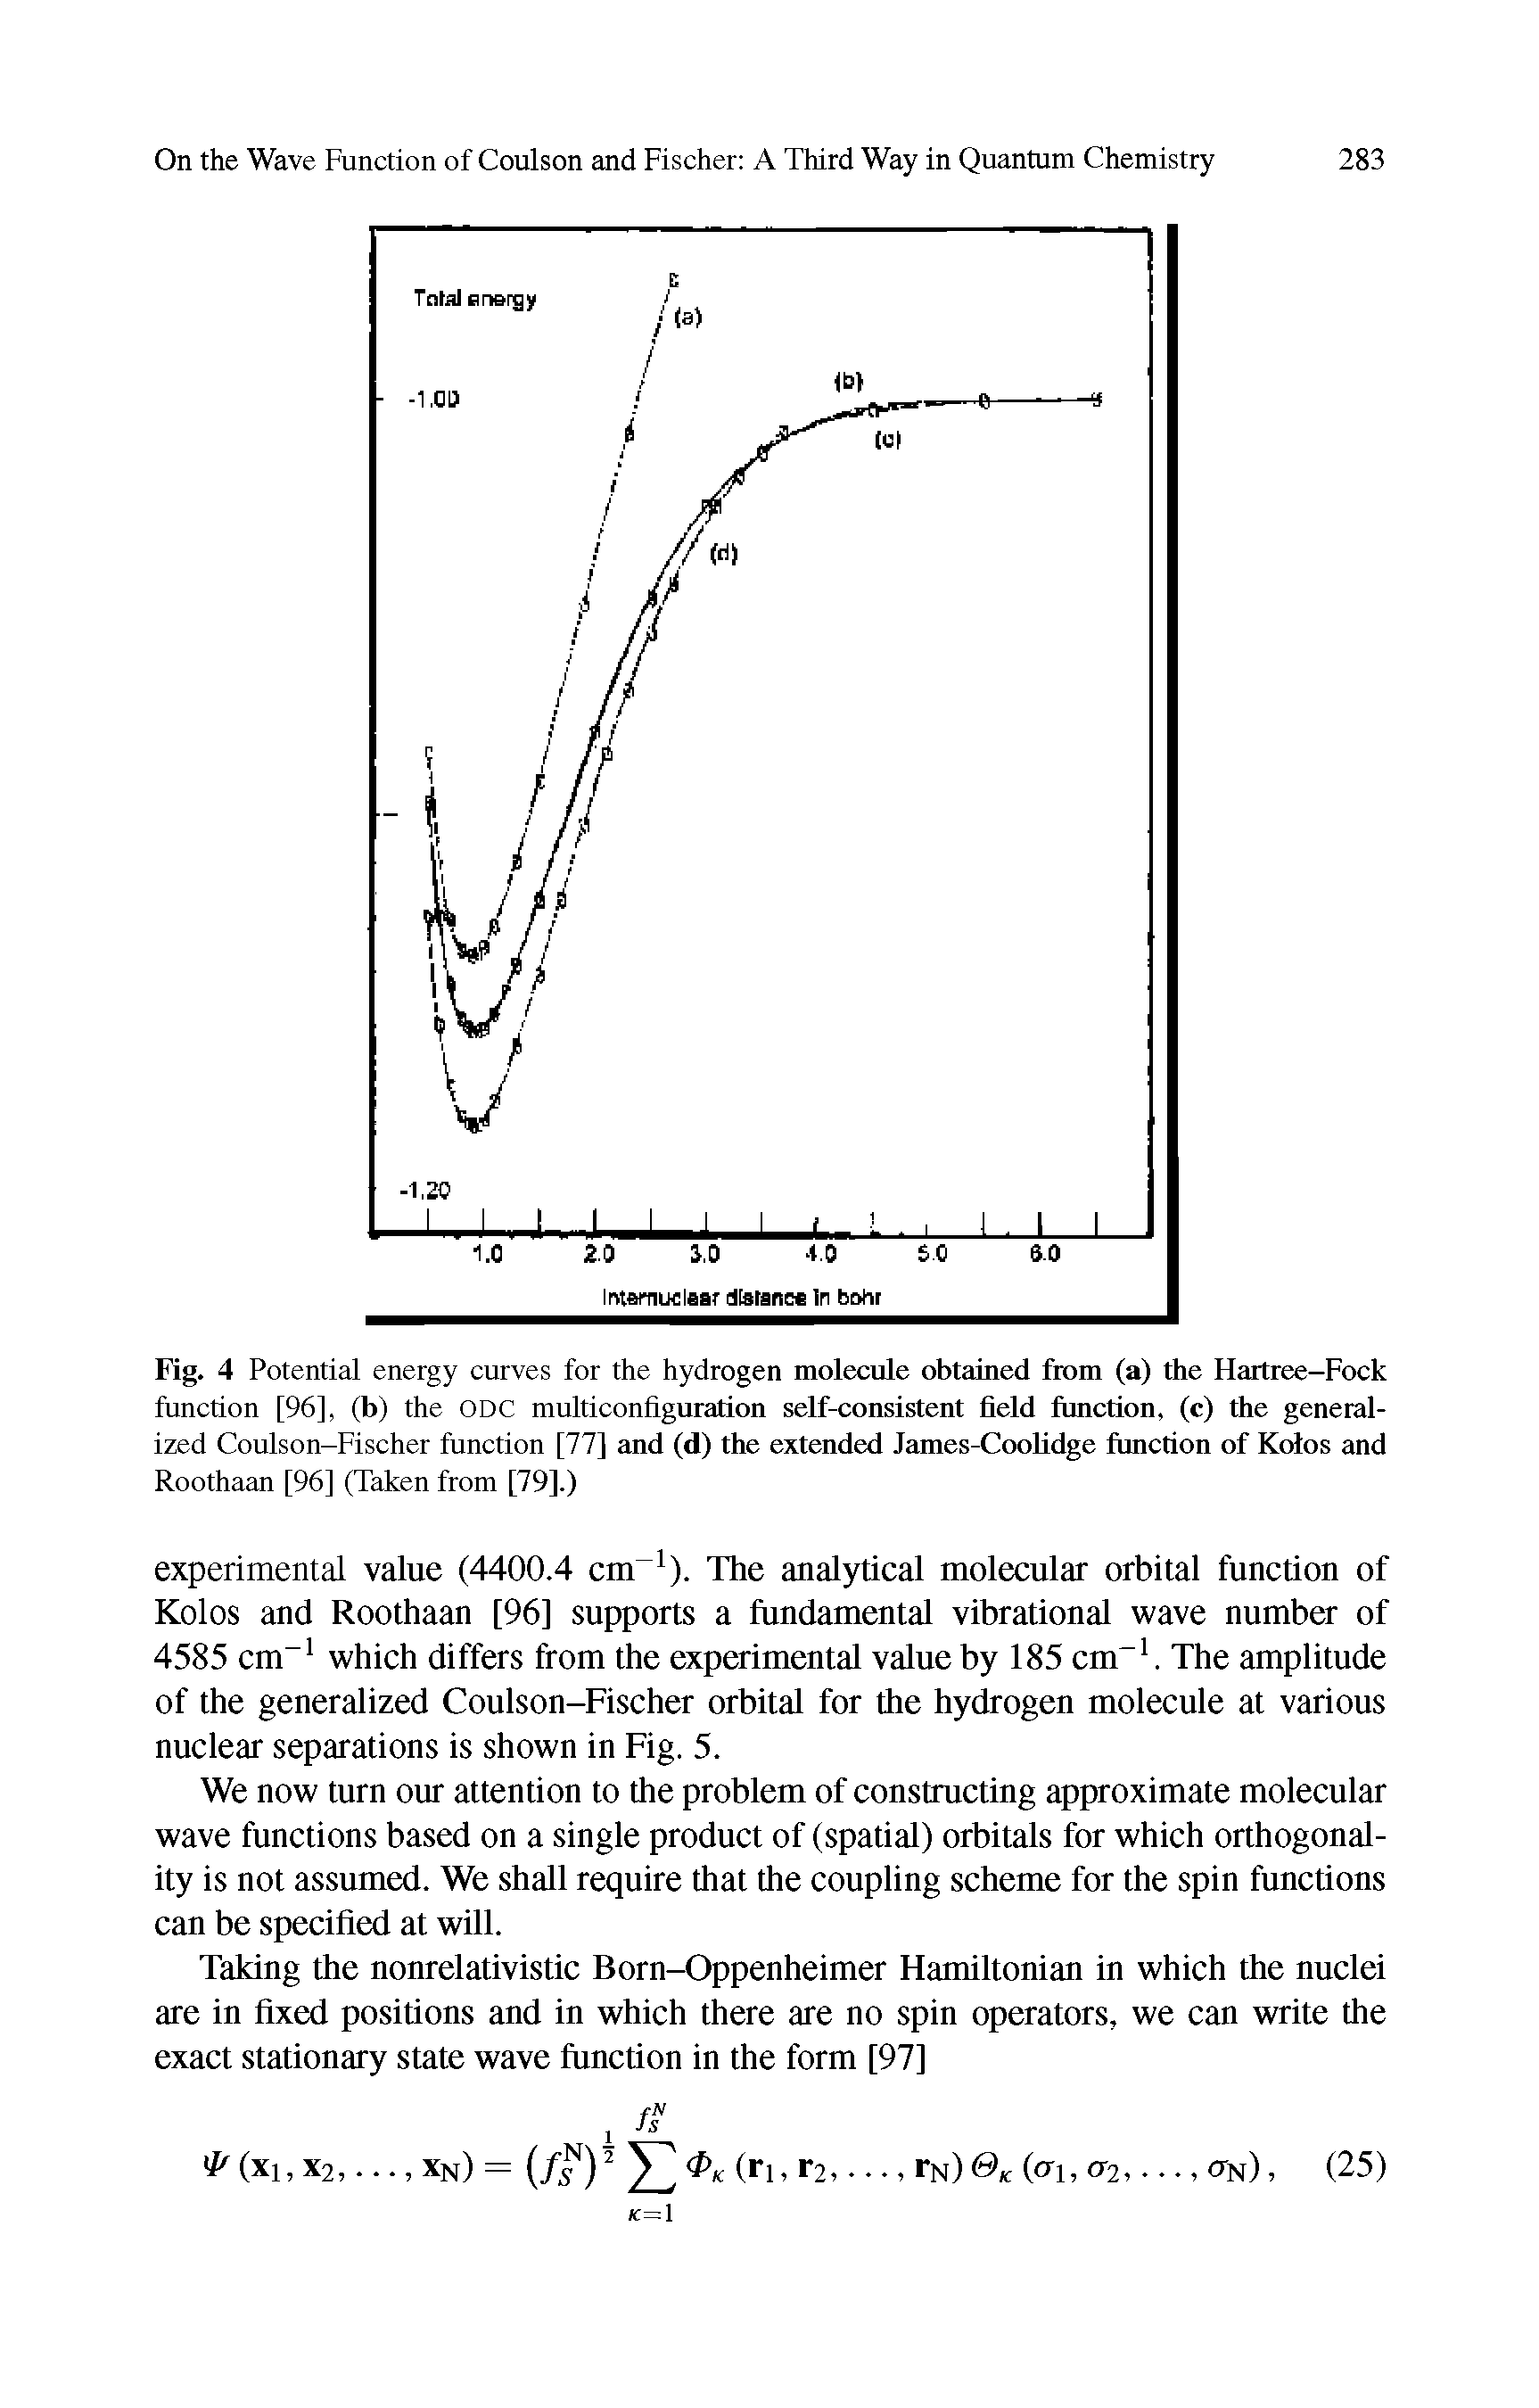 Fig. 4 Potential energy curves for the hydrogen molecule obtained from (a) the Hartree-Fock function [96], (b) the ODC multiconfiguration self-consistent field flmction, (c) the generalized Coulson-Fischer function [77] and (d) the extended James-CooUdge flmction of Krfos and...